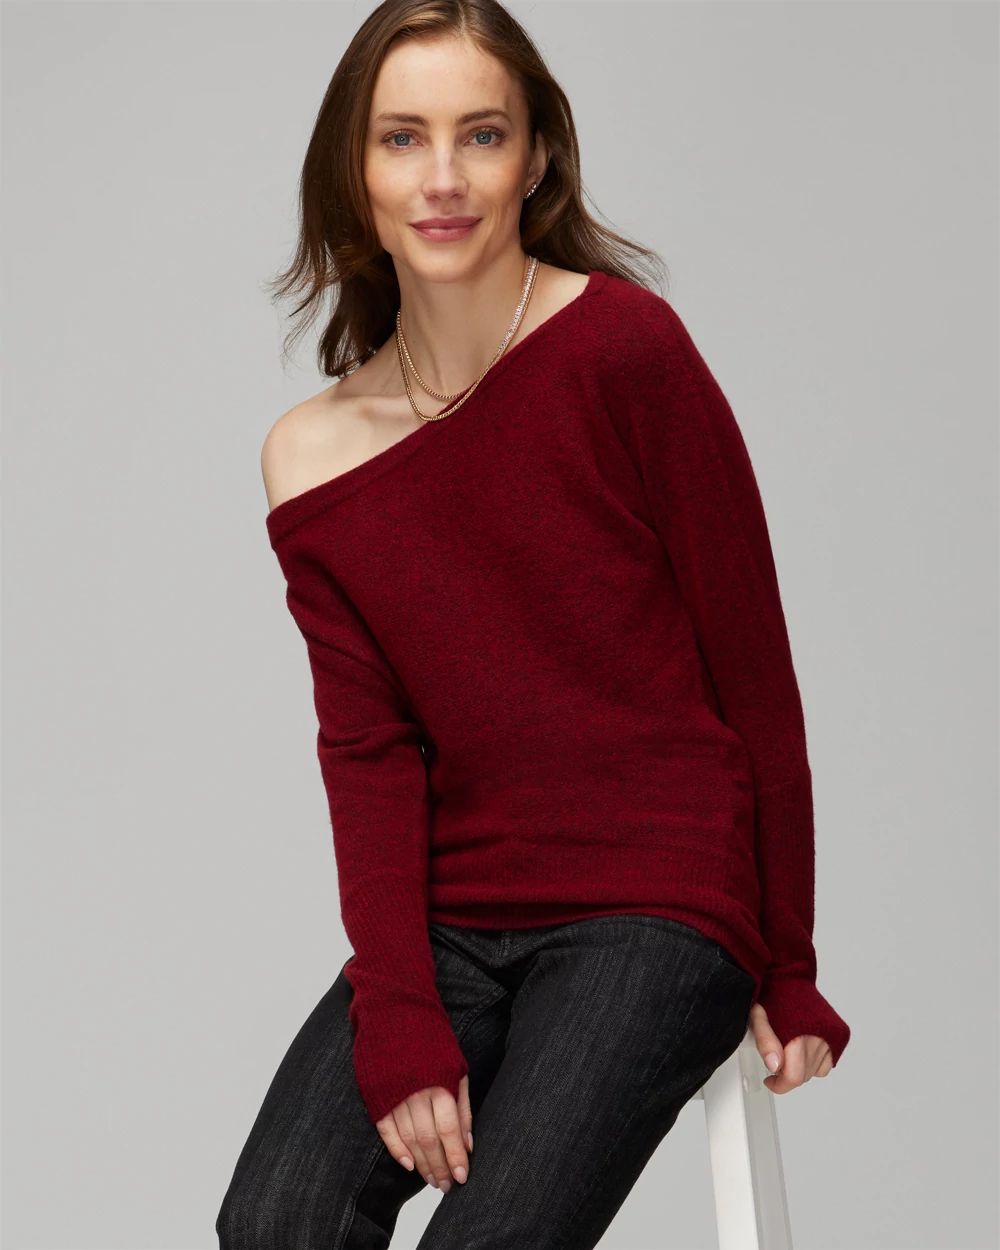 Asymmetrical Shoulder Pullover Sweater click to view larger image.